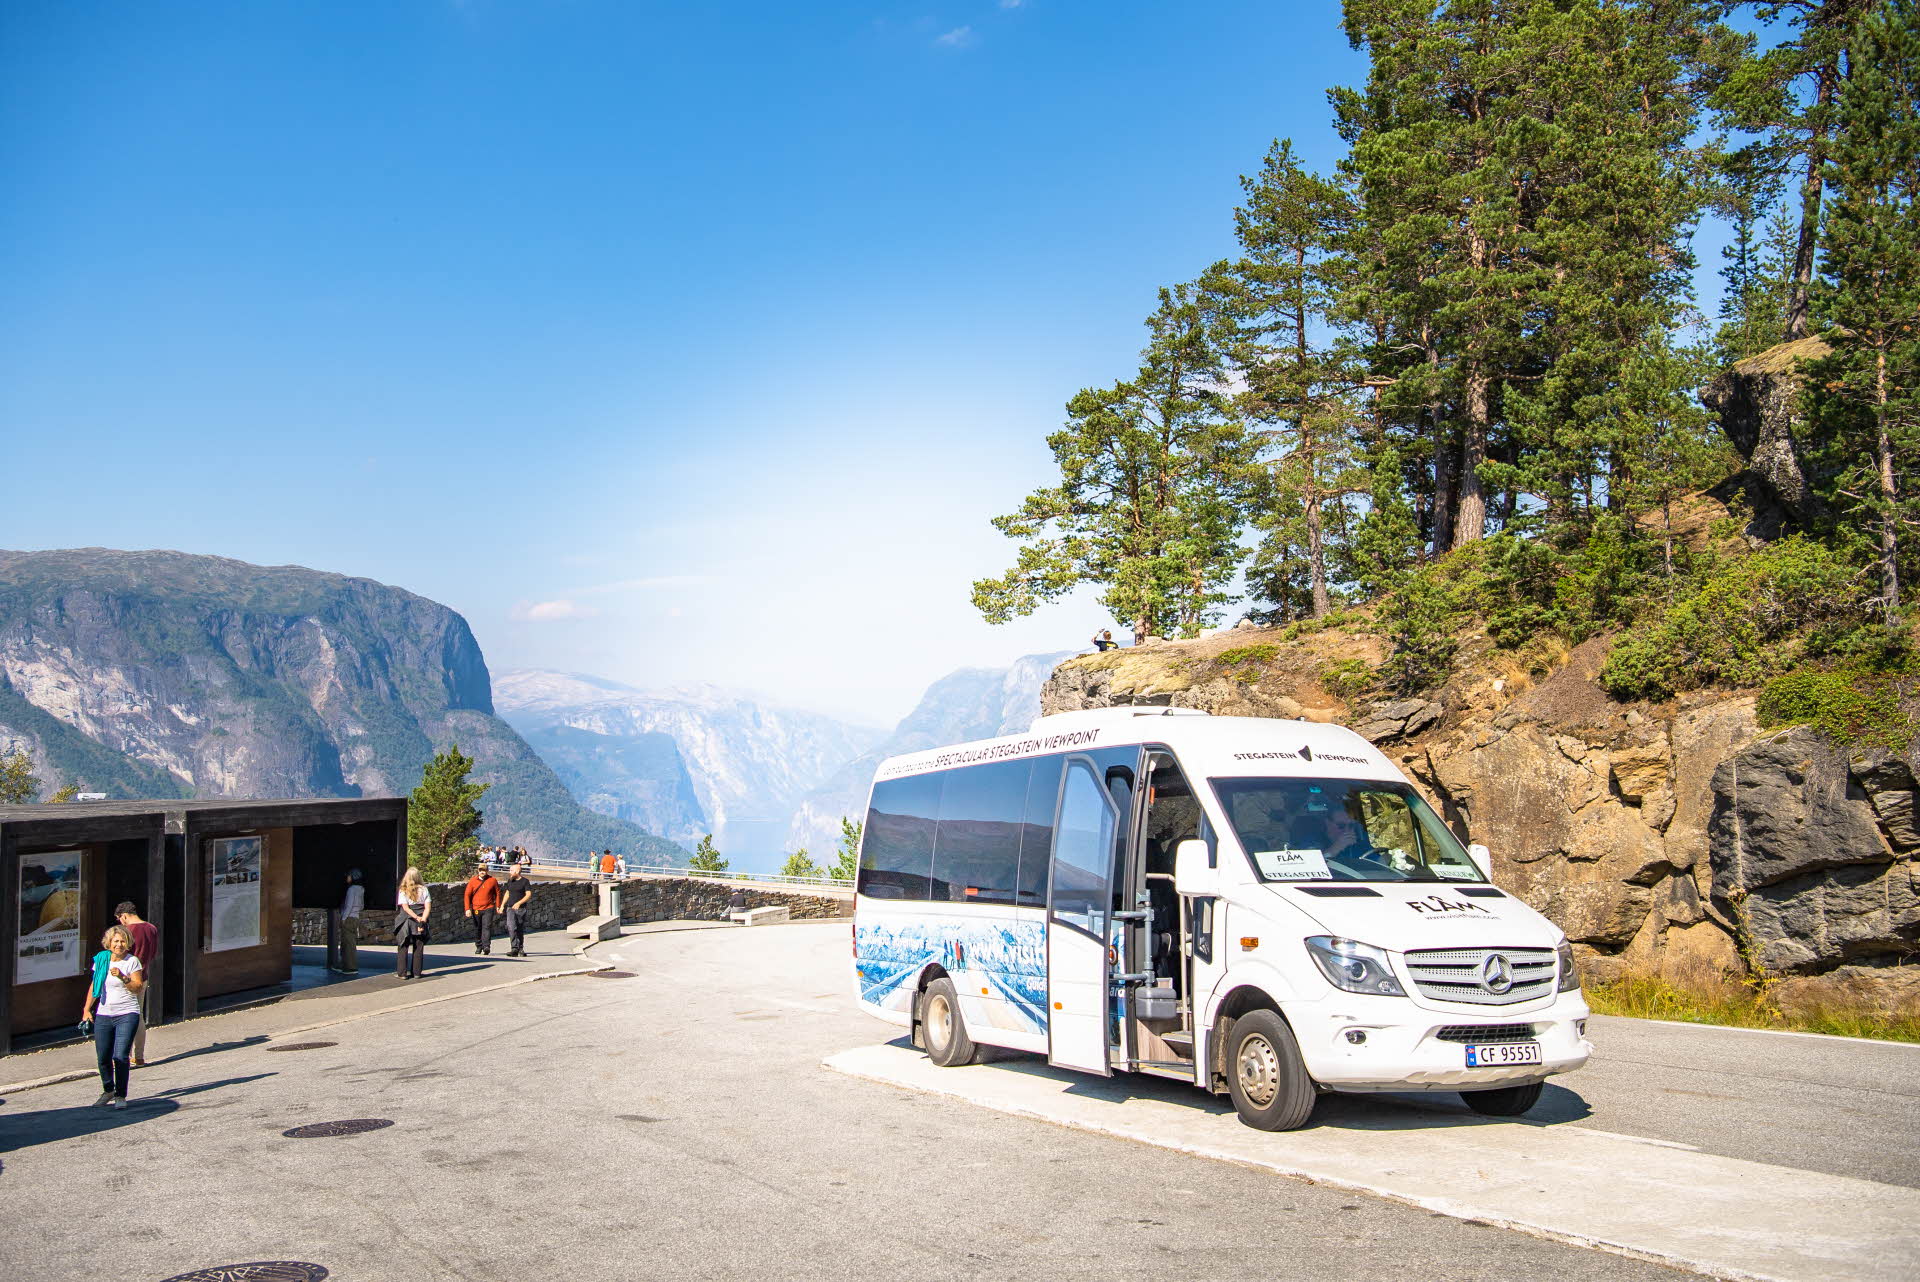 A shuttle bus next to a pine forest and views of mountains and a blue sky.